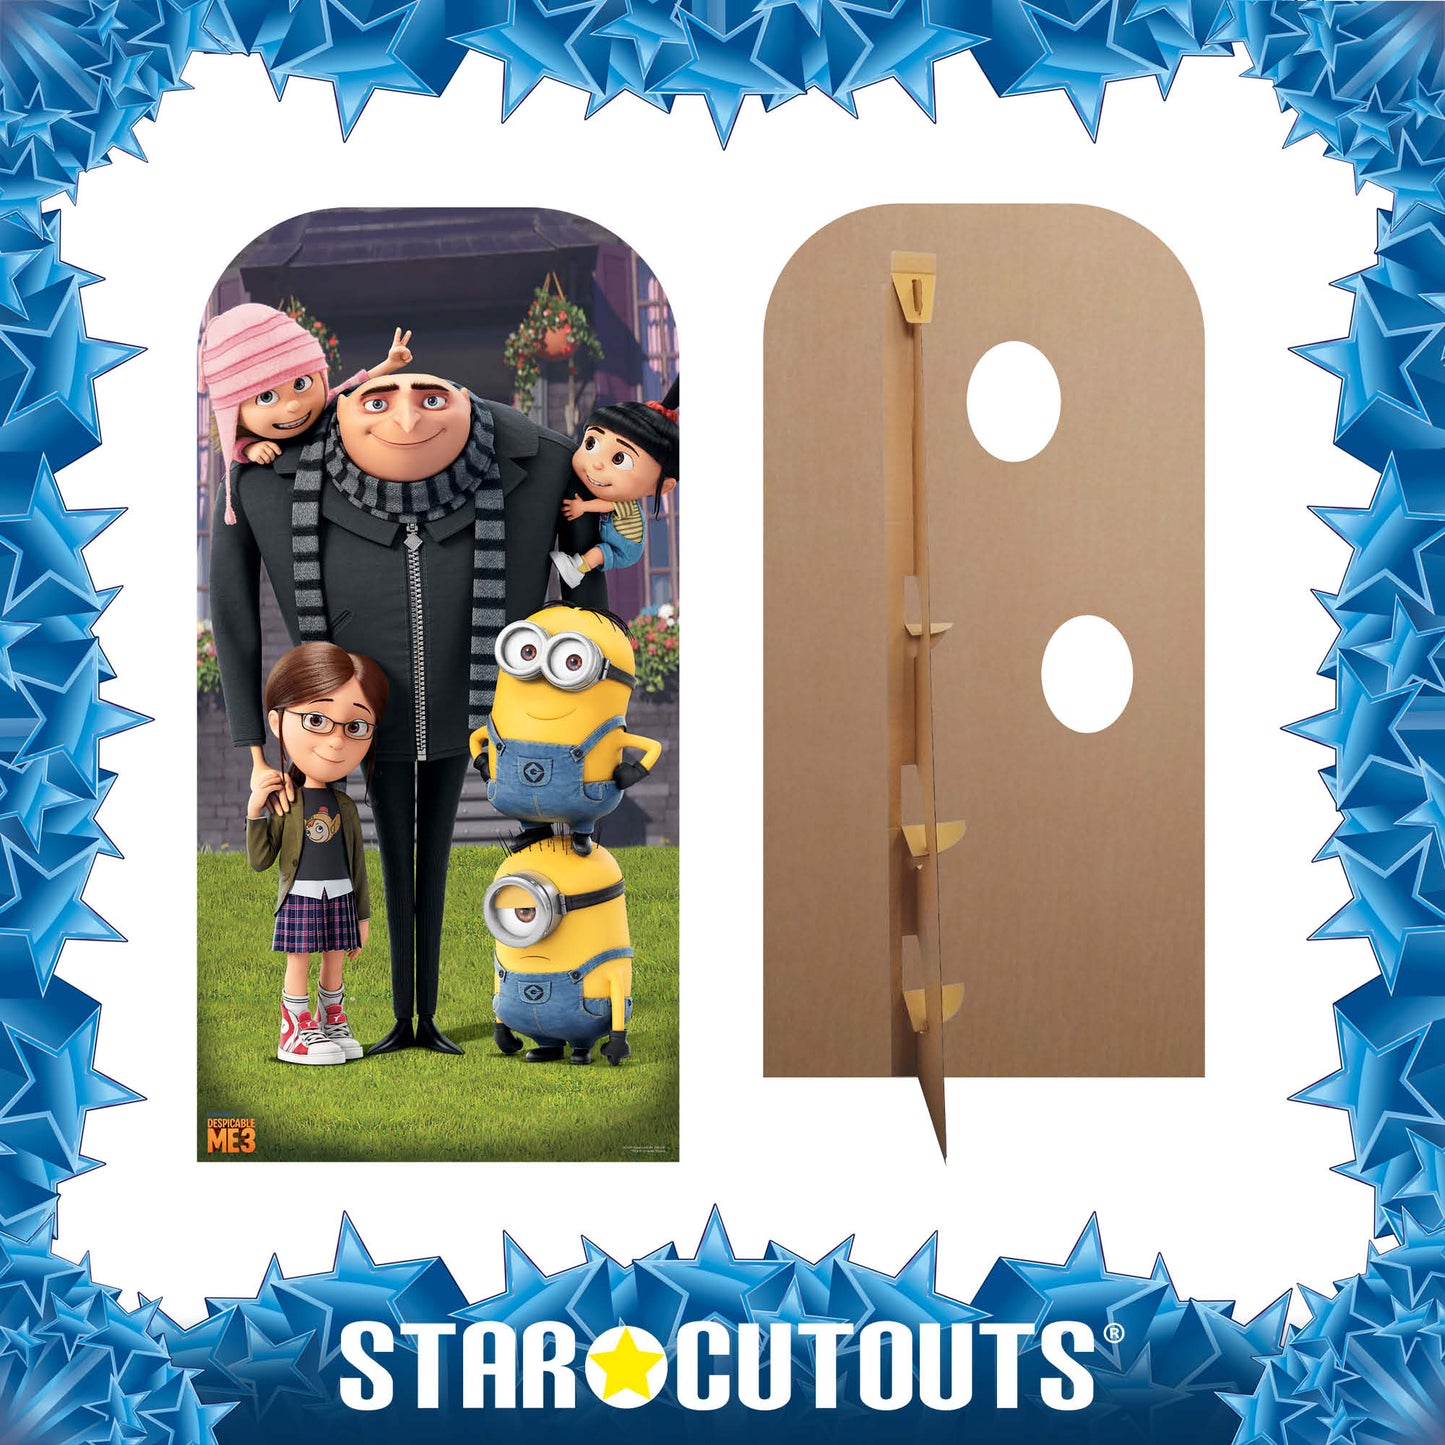 Despicable Me Adult and Child Stand-In Despicable Me and Minions Cardboard Cutout